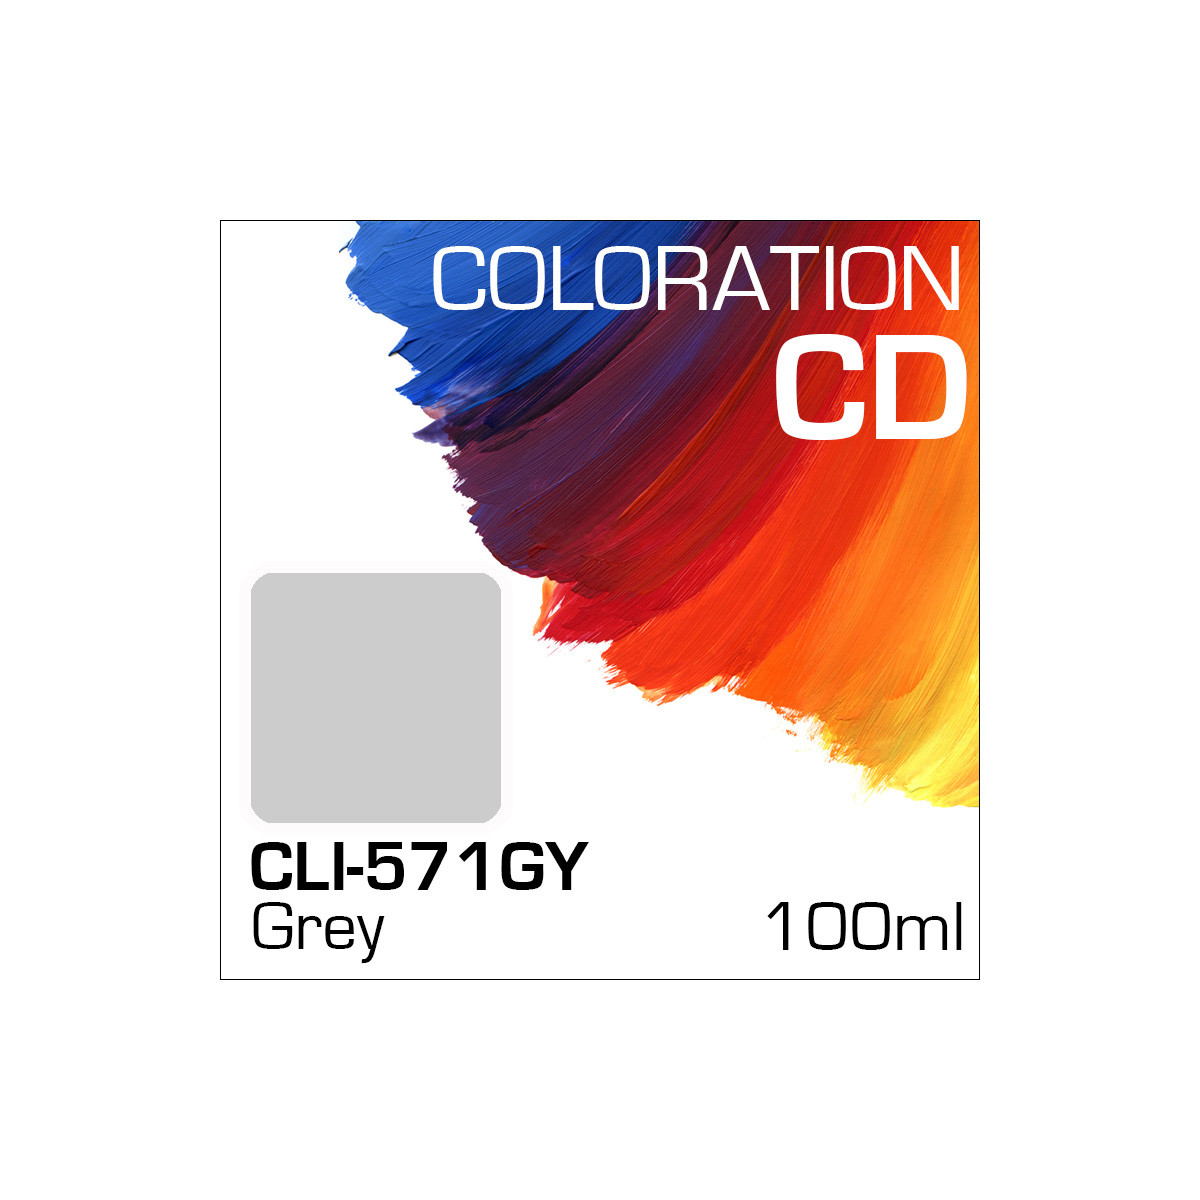 Coloration CD Flasche 100ml CLI-571GY Grey